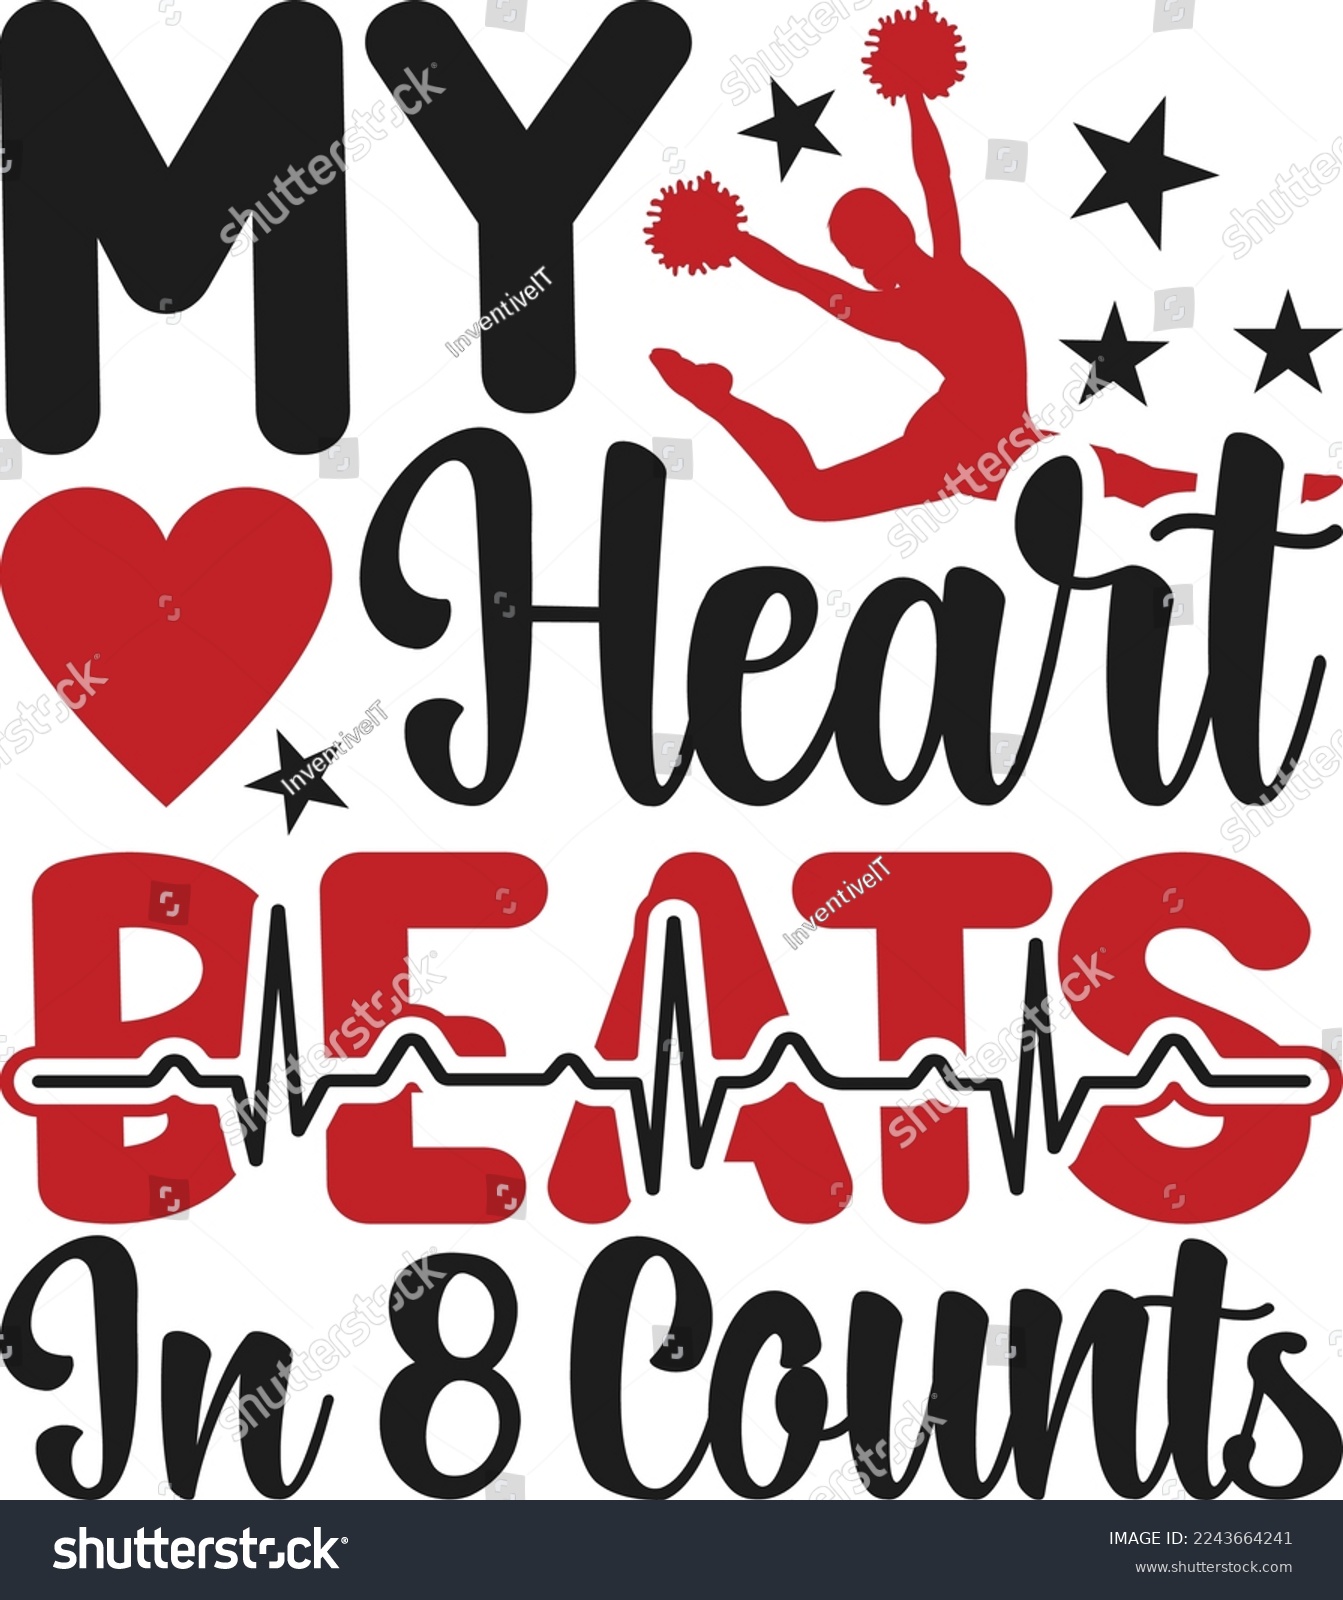 SVG of My Heart Beats In 8 Counts SVG Printable Vector Illustration svg